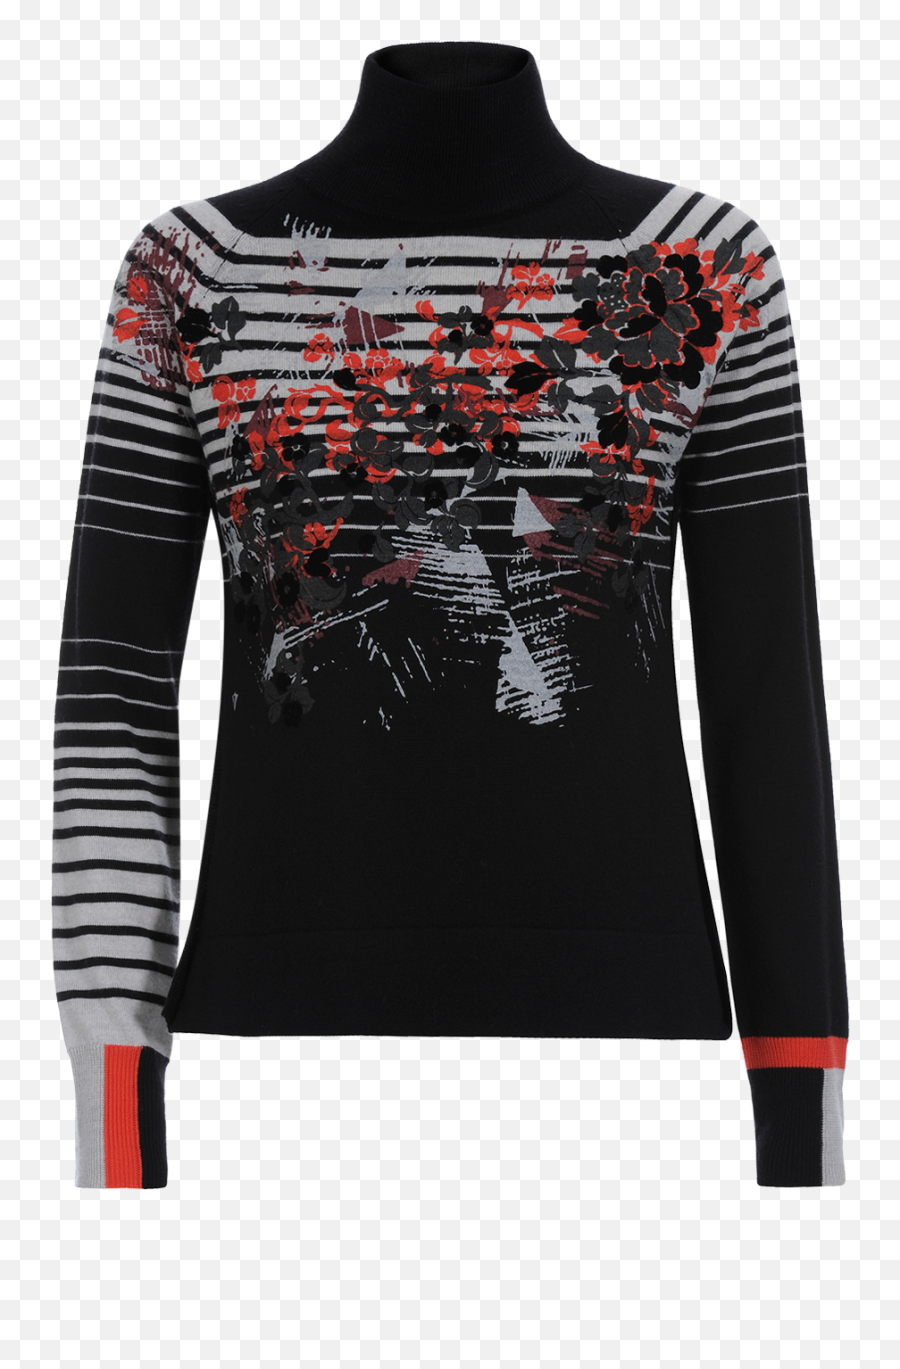 Animate Flock Floral With Stripe Sweater Png